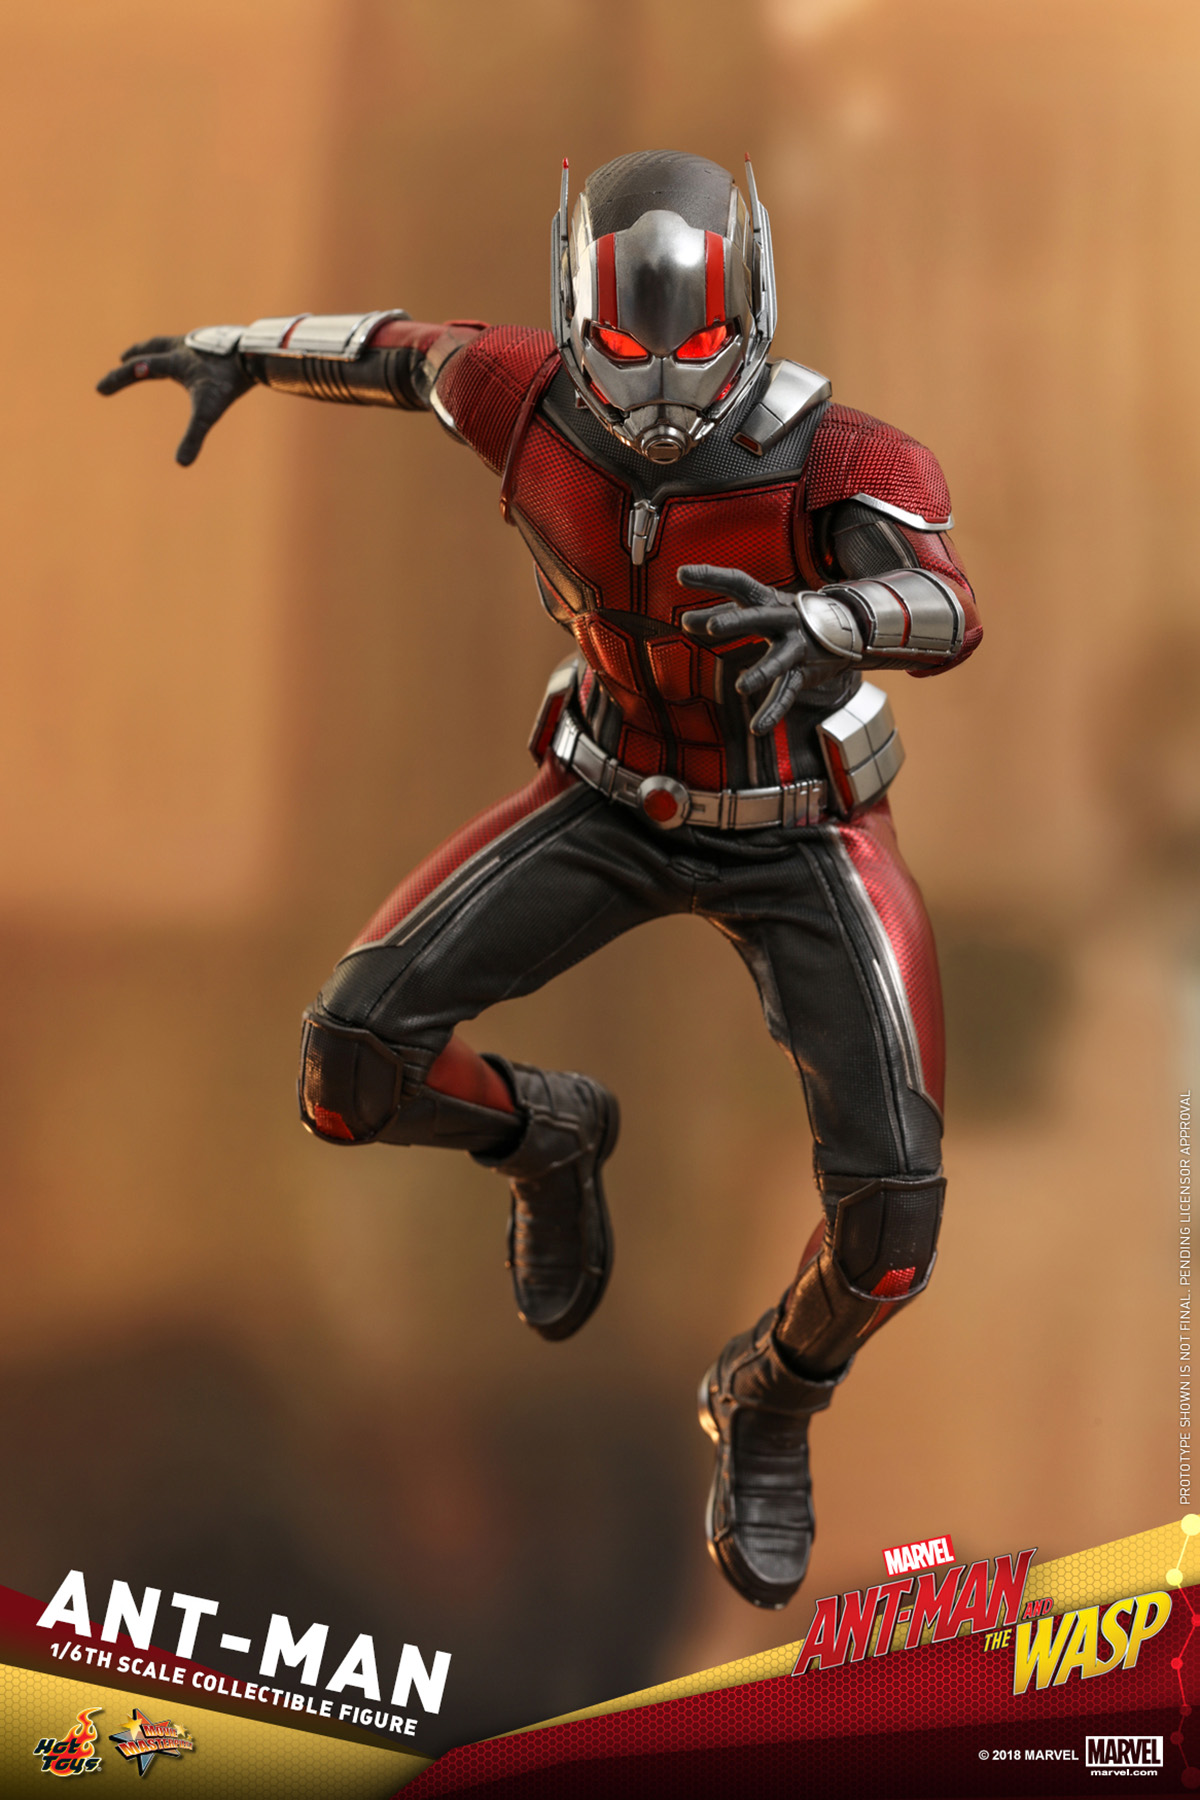 hot-toys-ant-man-and-the-wasp-ant-man-collectible-figure_pr11